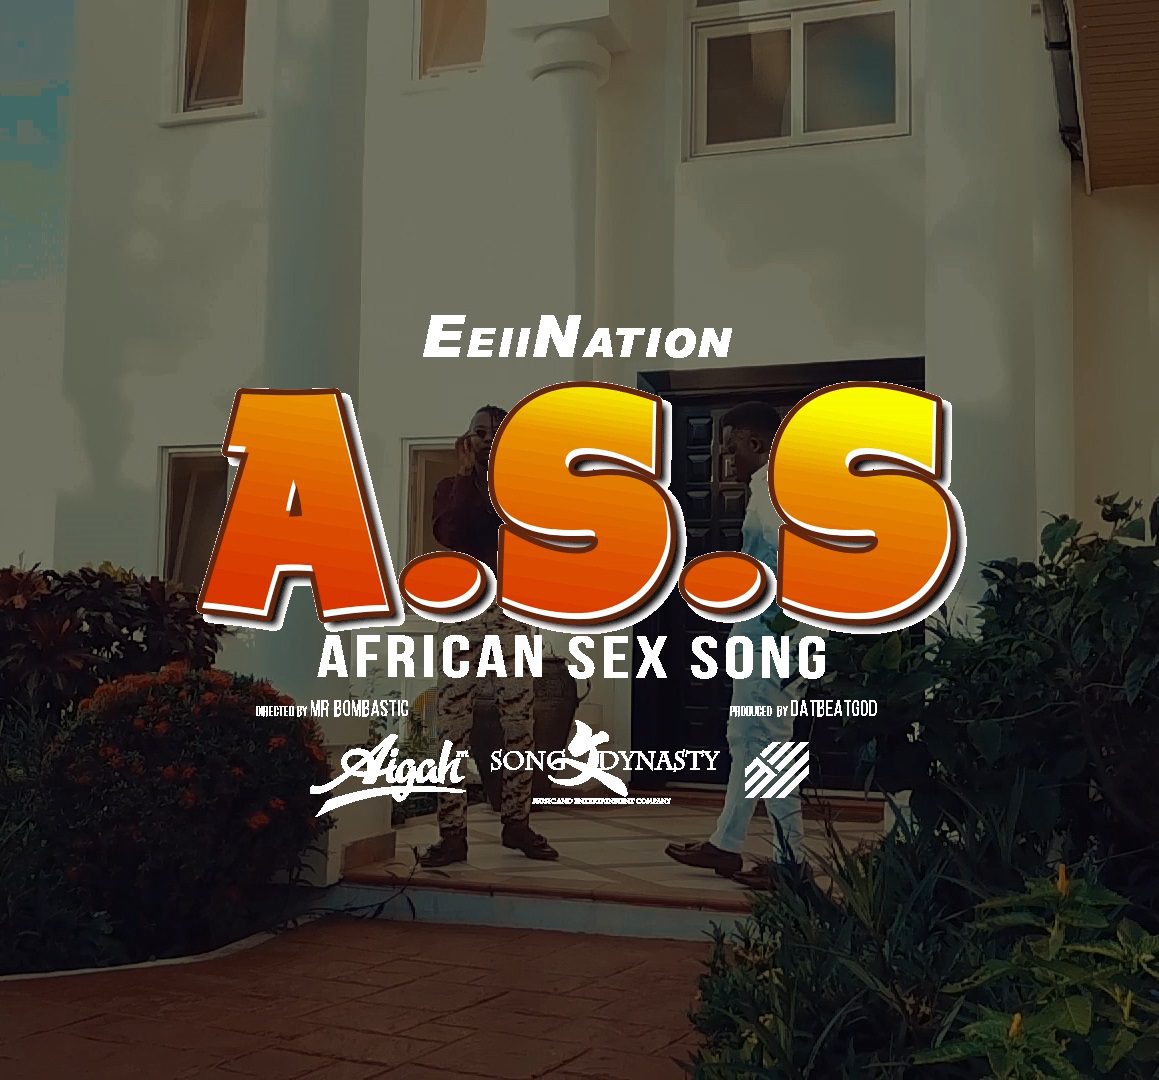 Audio/Video: EeiiNation – A.S.S (African Sex Song)(Prod. By DatBeatGod & Directed by Mr Bombastic)